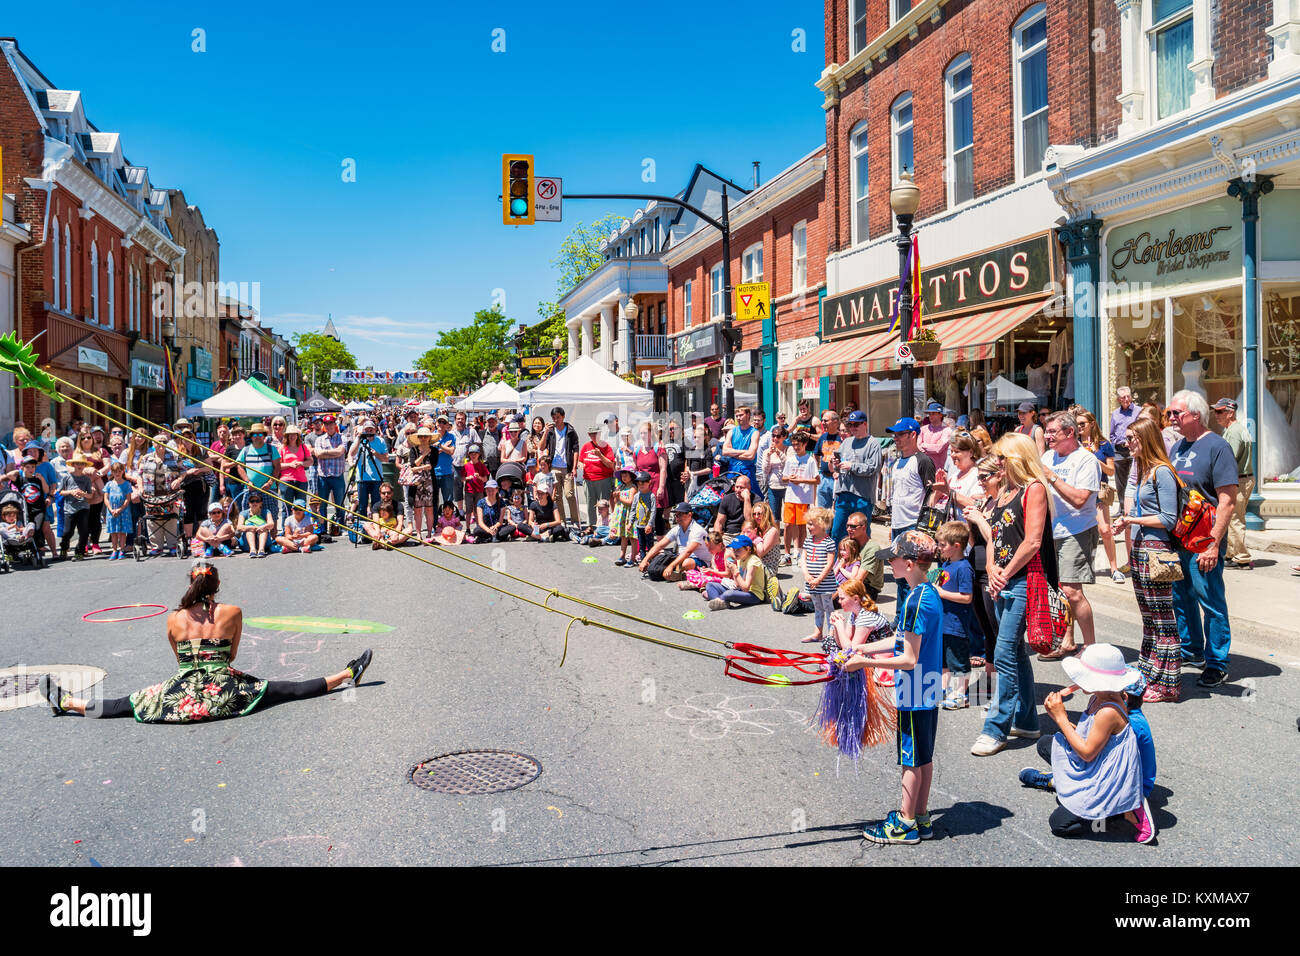 Crowd enjoys a busker show during the Buskerfest in downtown Dundas, Ontario, Canada on a sunny day. Stock Photo